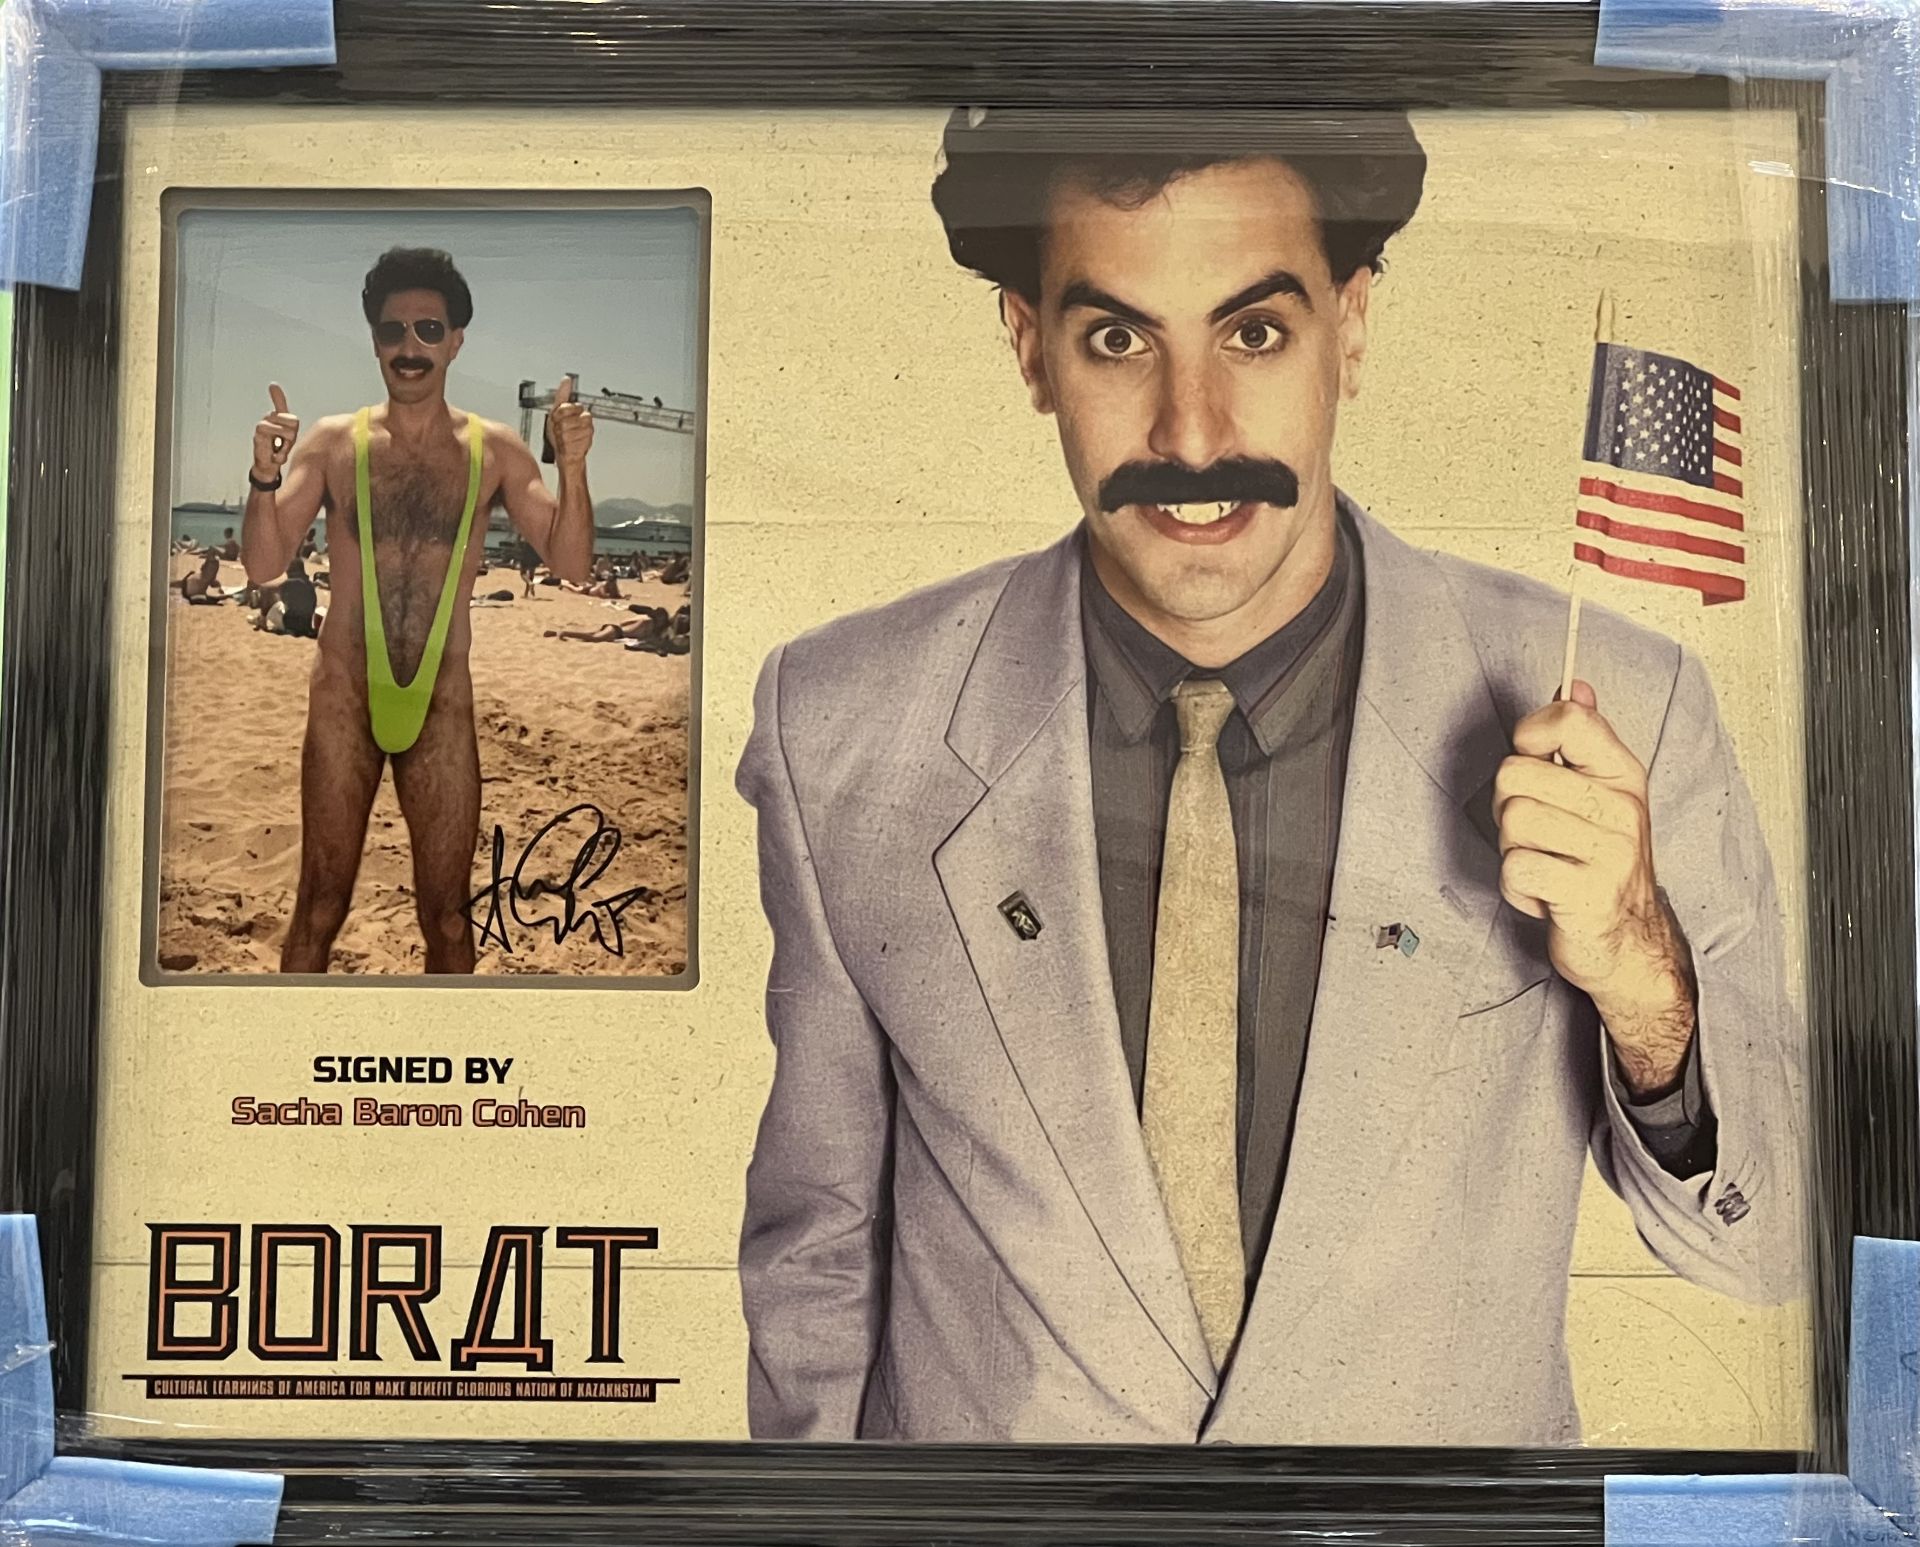 Authentic signature presentation of the movie 'BORAT', HAND SIGNED by Sacha Baron Cohen with COA